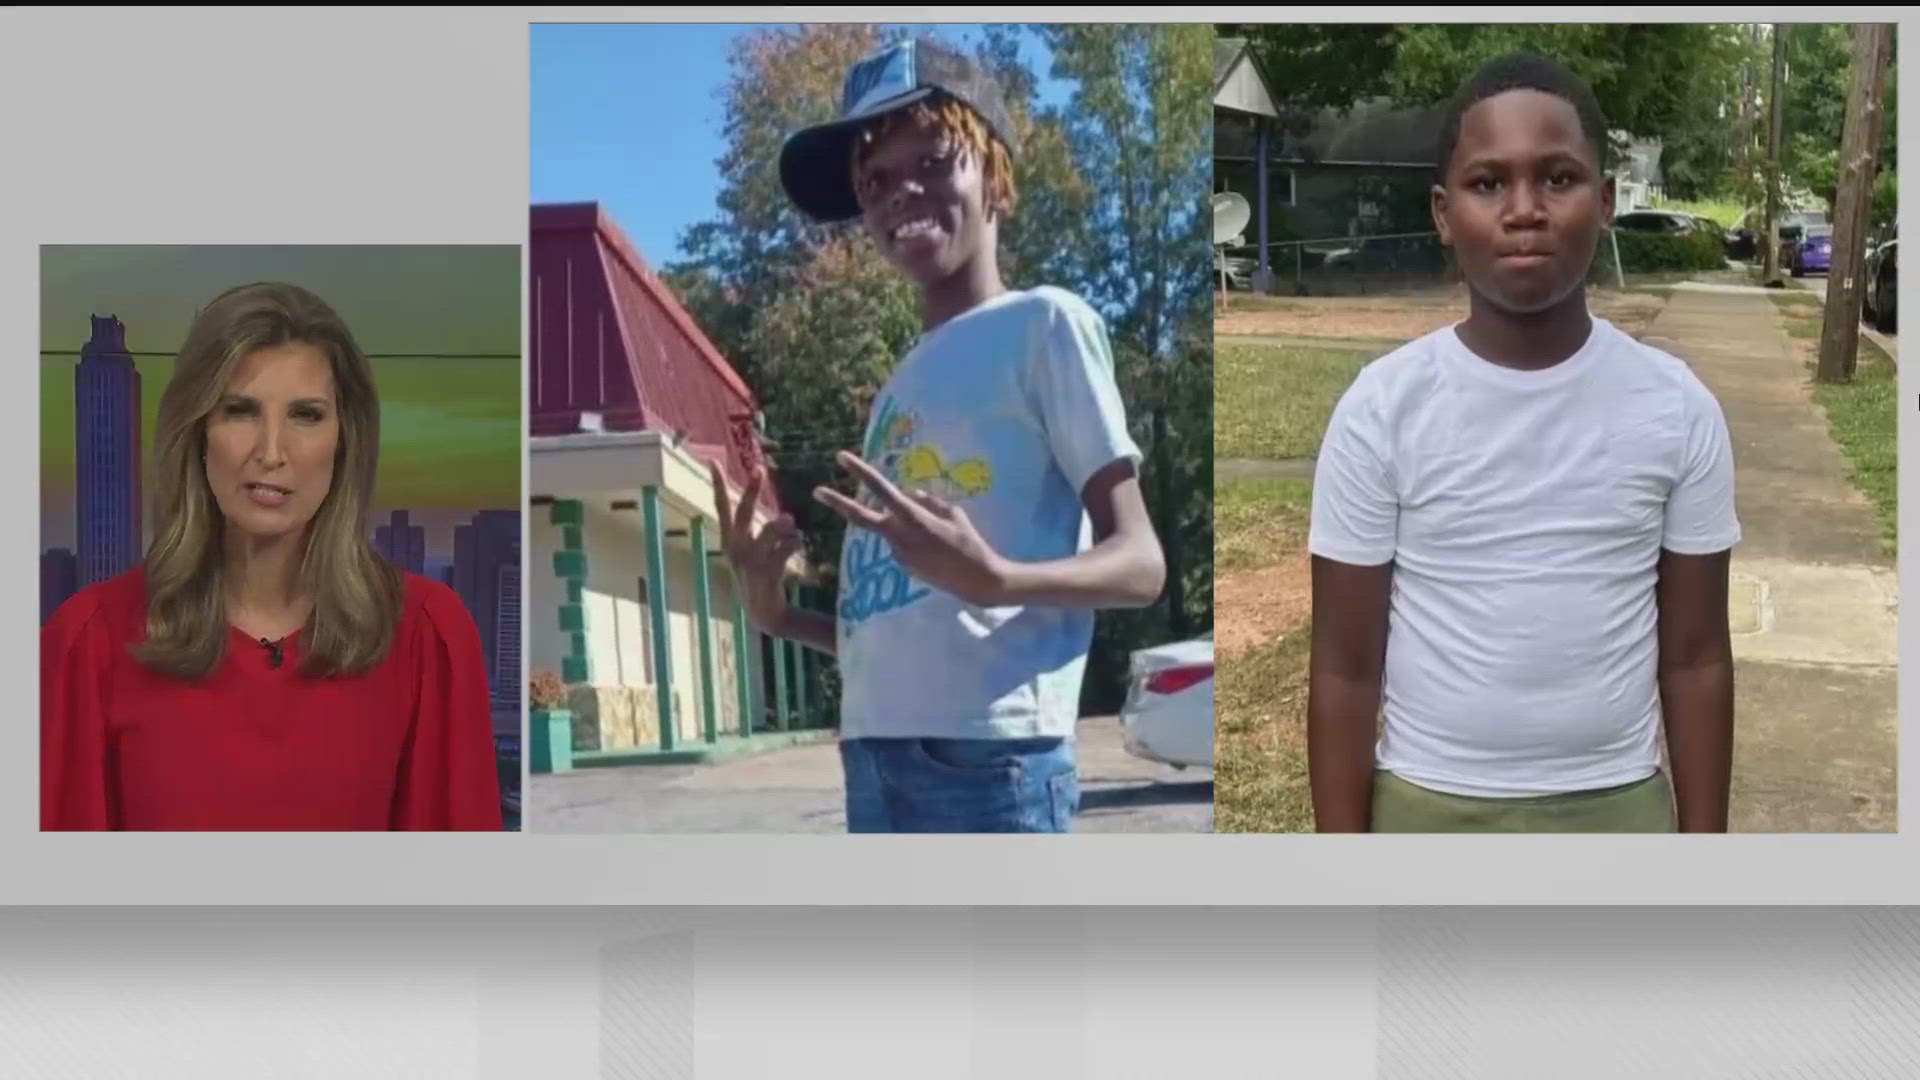 There is now a $50,000 reward to find the person responsible for a shooting this week that left two minors dead and one injured.